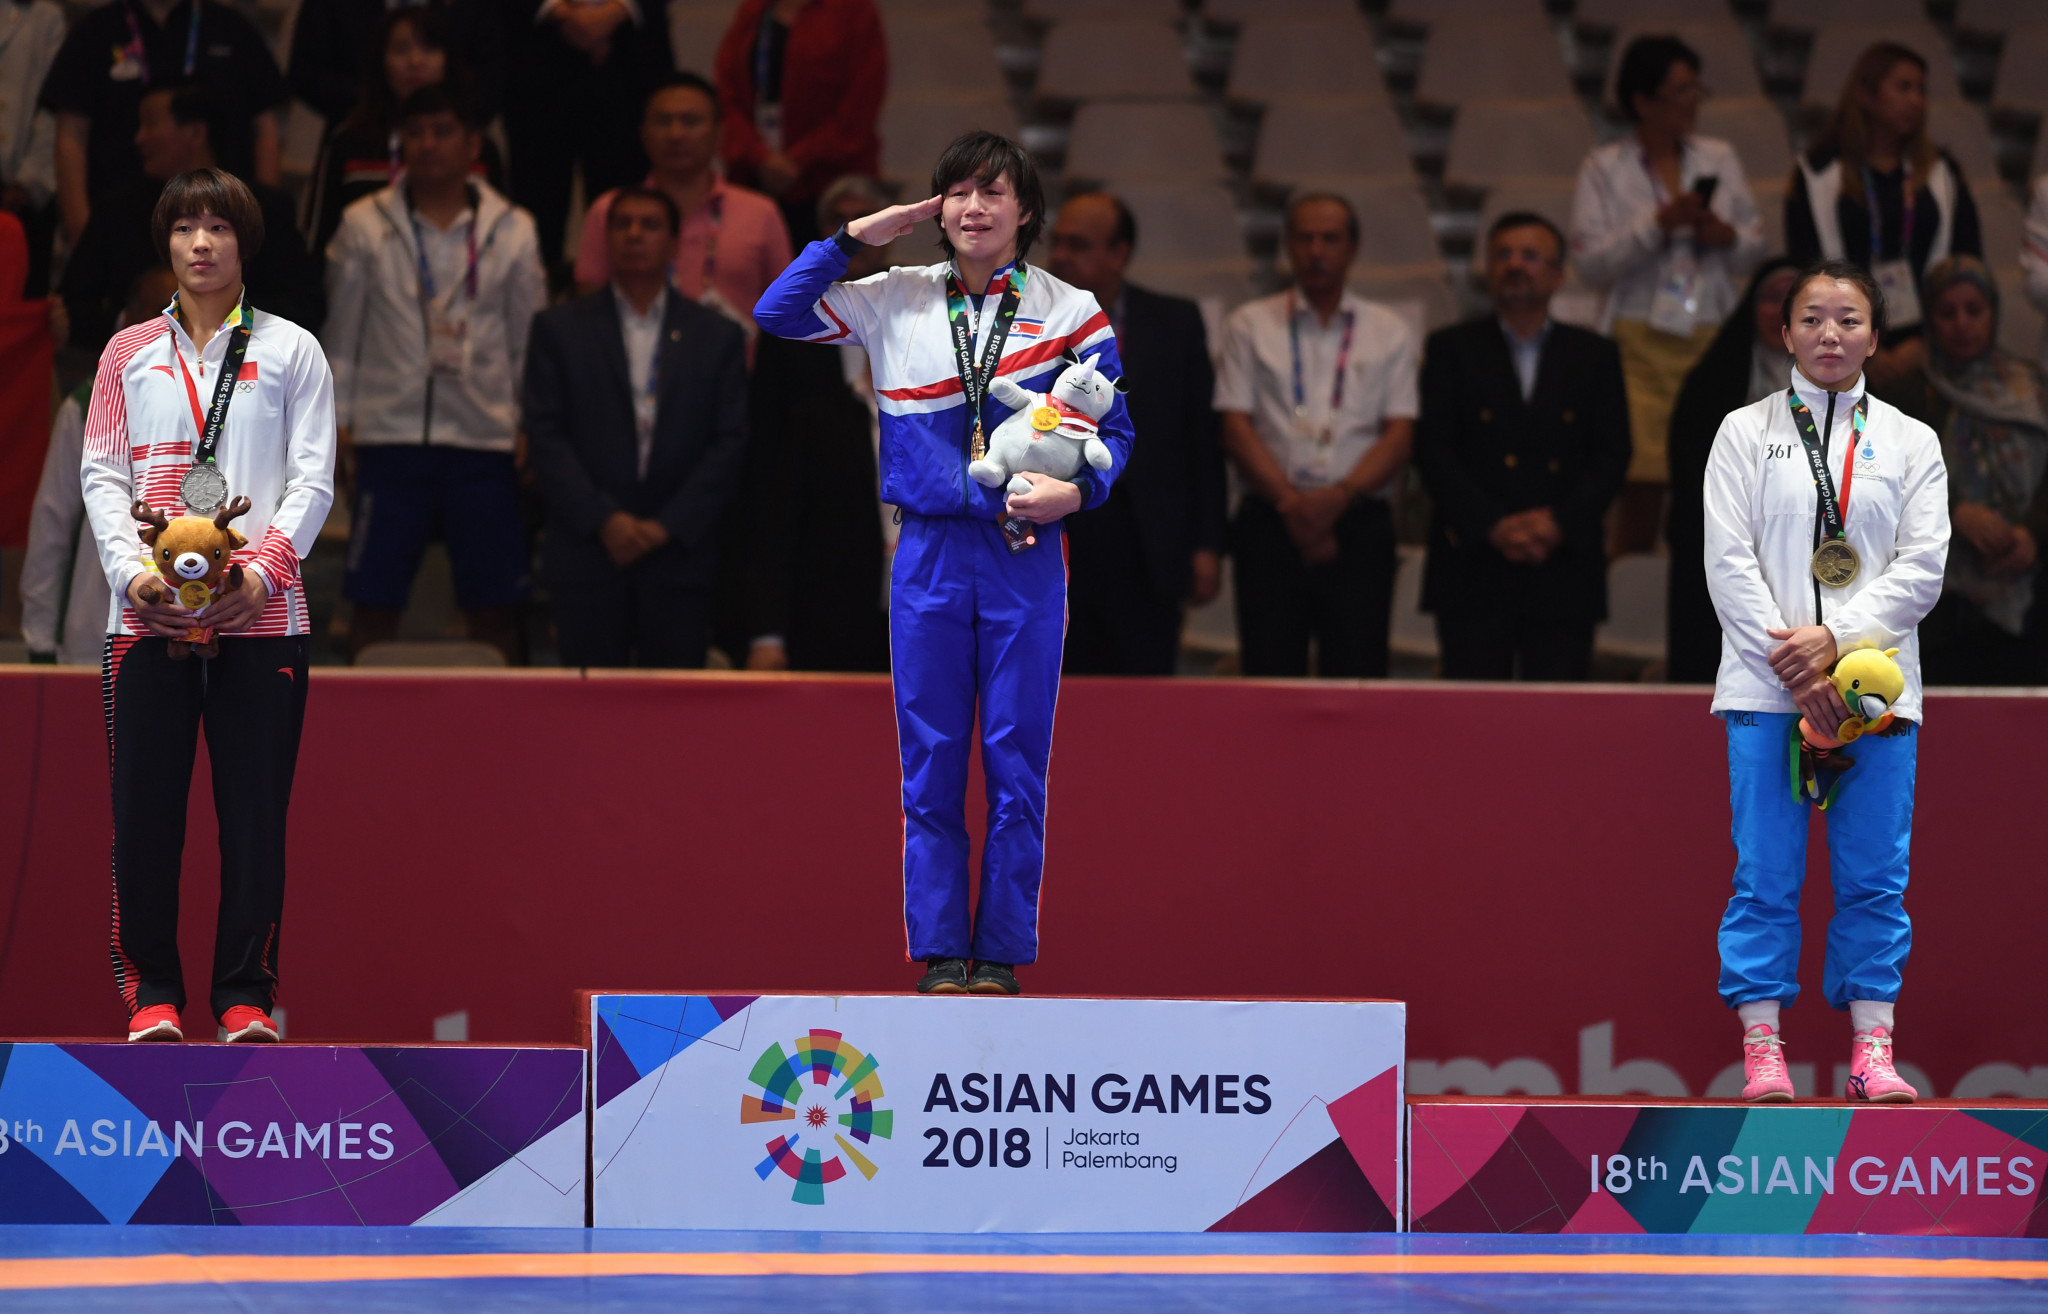 Fellow countrywoman Jong Myong Suk tasted victory in the 57kg event ©Getty Images